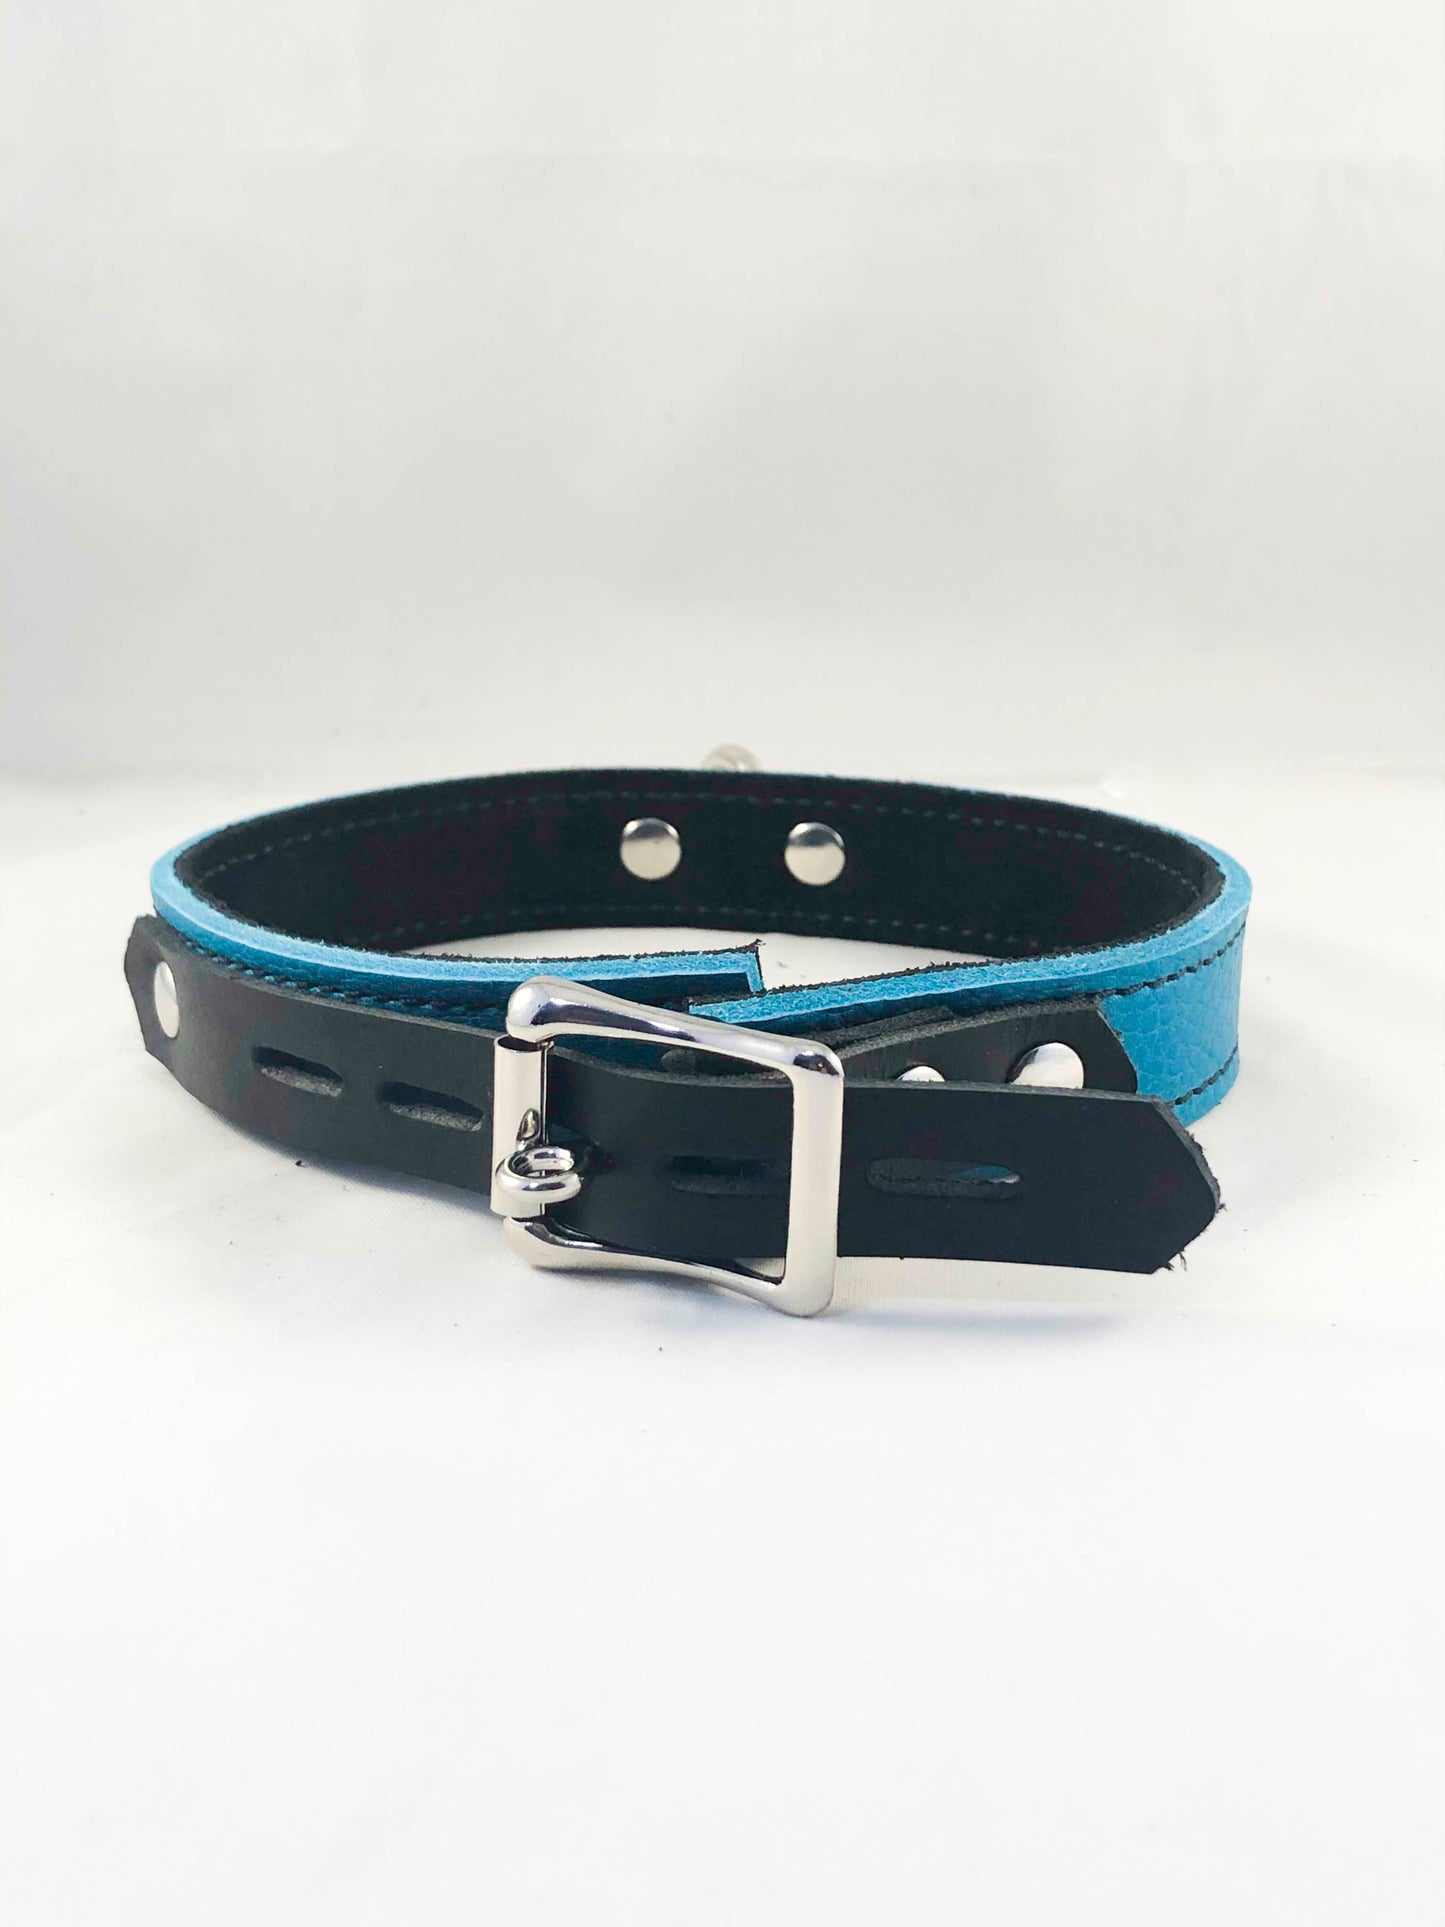 Back view of the teal Basic Single Ring Collar.